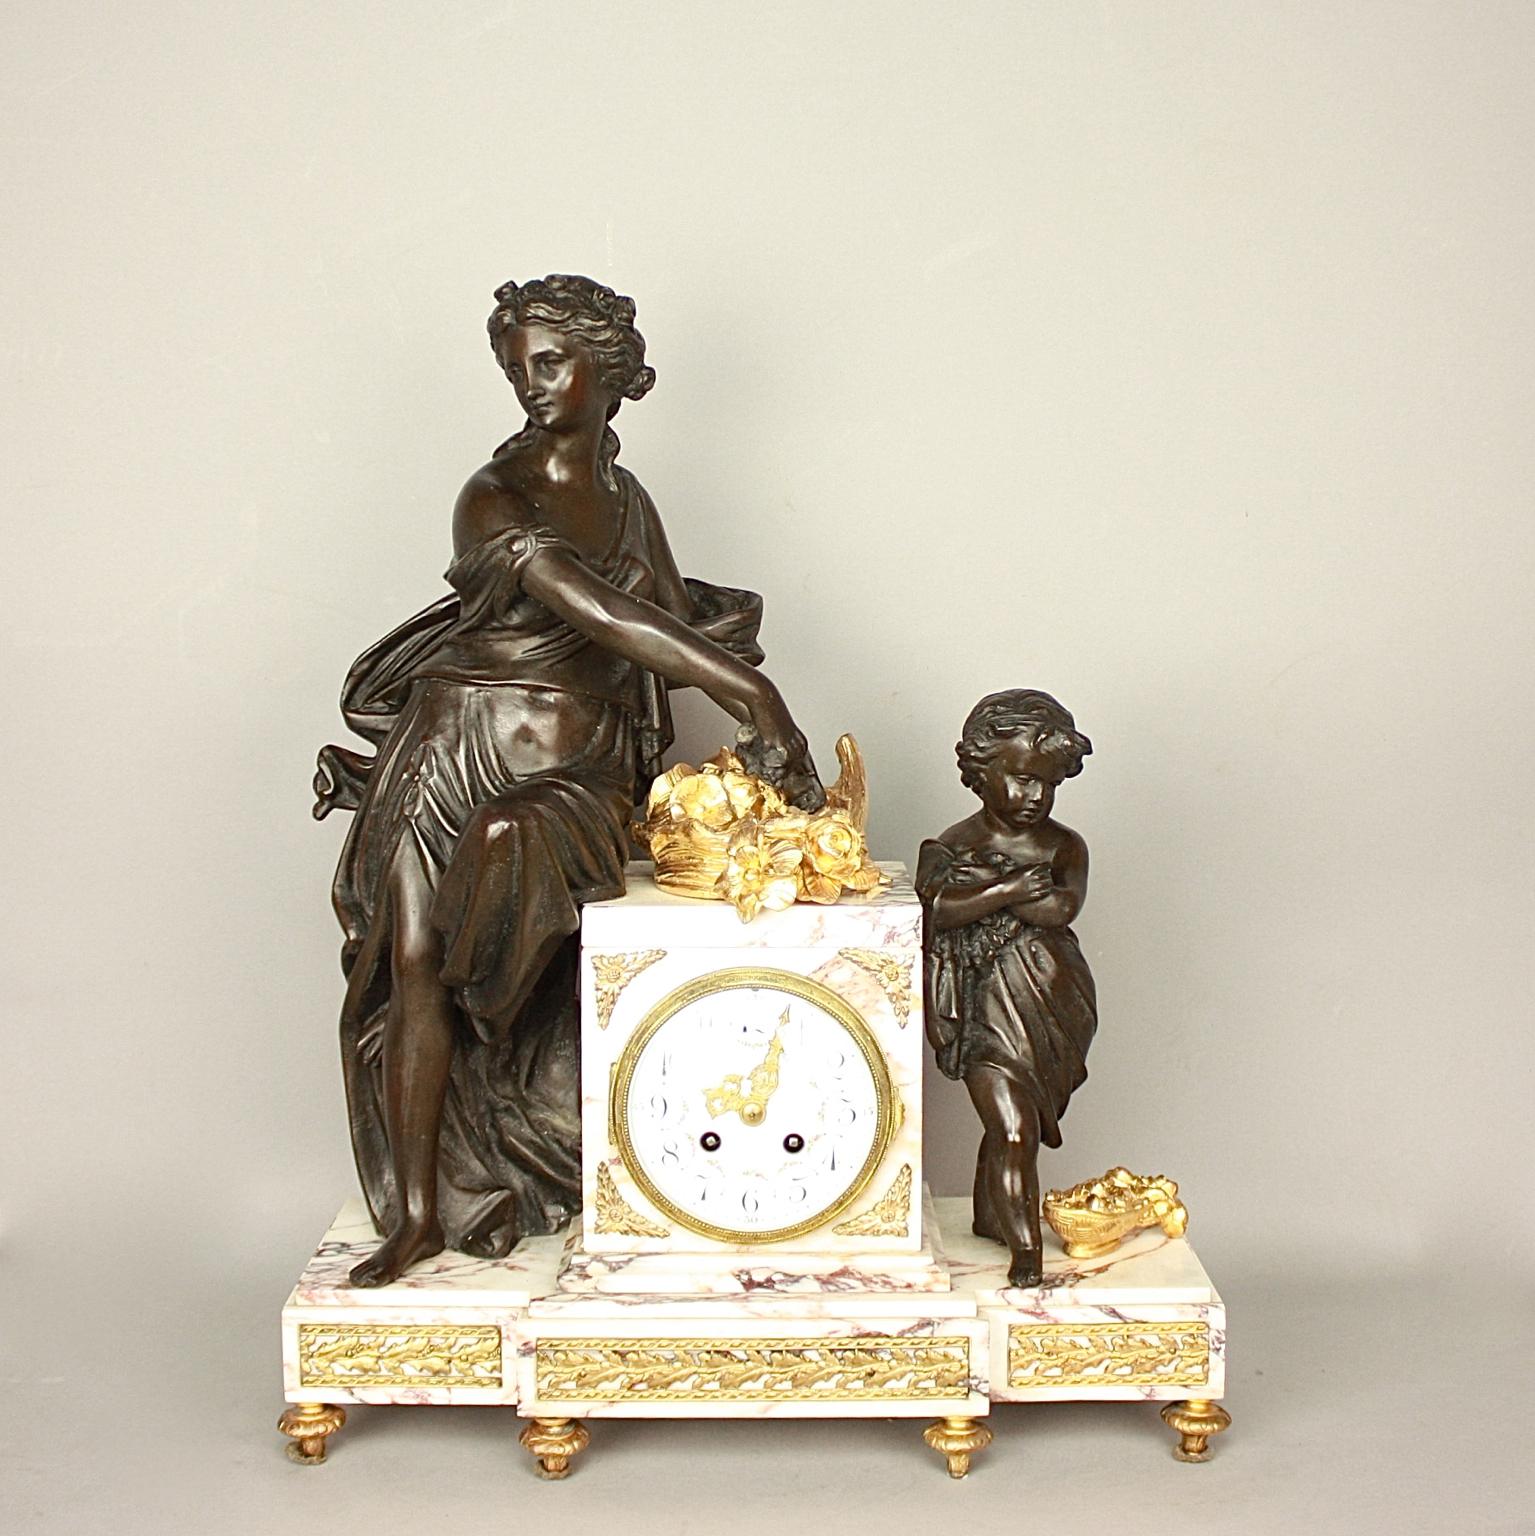 A 19th century Louis XVI style clock garniture, a so called 'Garniture de Chemineé'. The mantle clock with two matching vases constructed of pink veined marble and gilt metal. The rectangular drum case with a finely painted enamel dial, Arabic